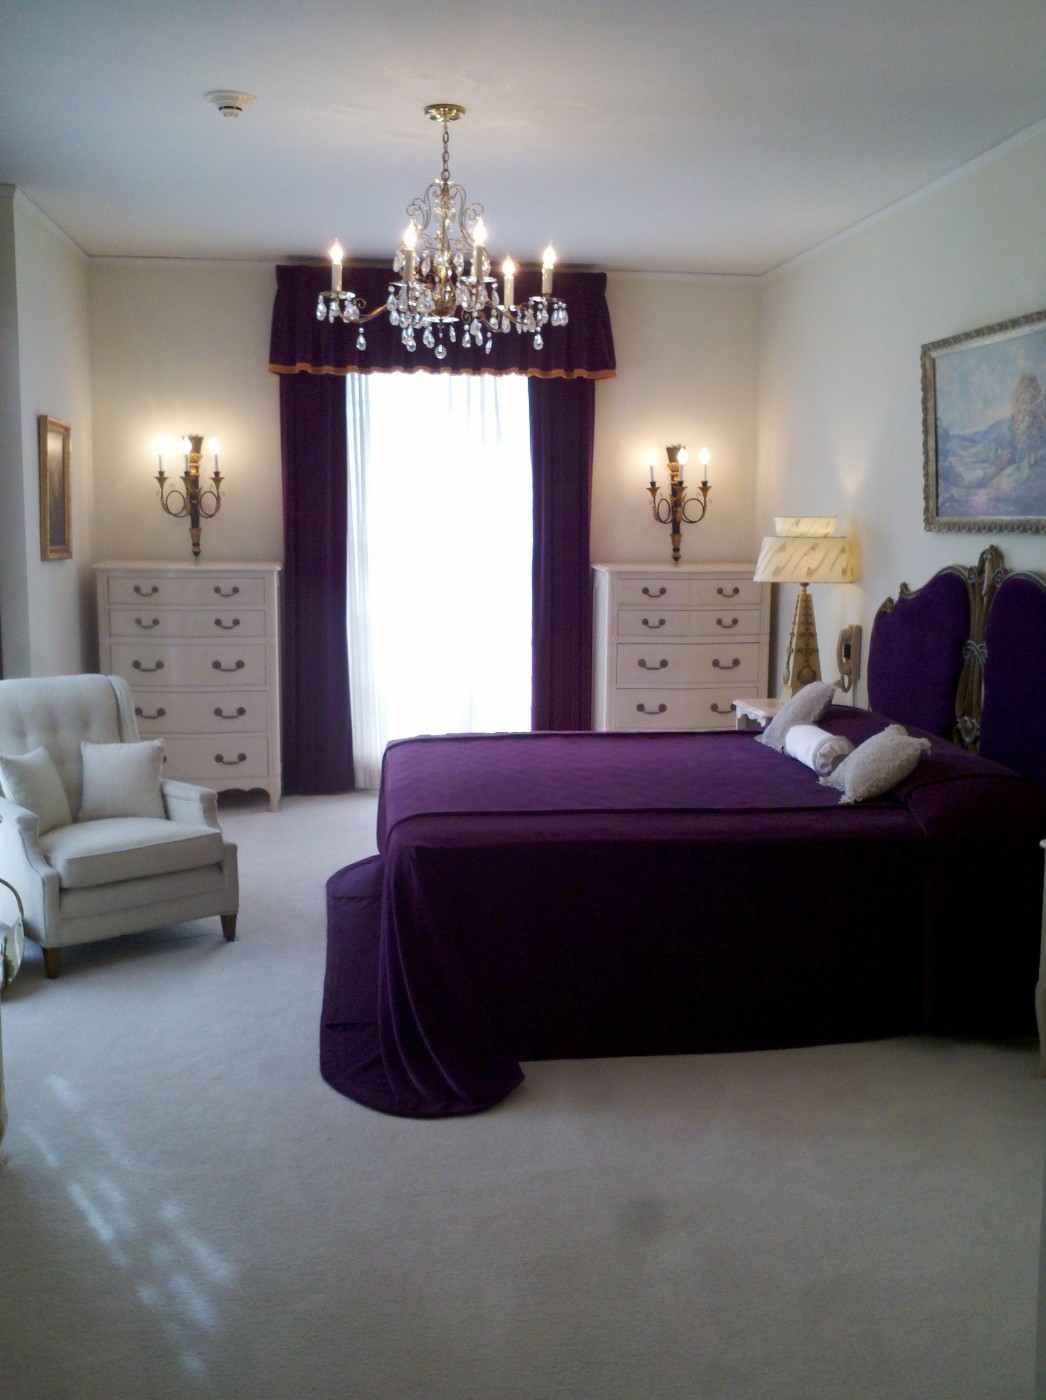 Purple Bedroom Dark Easy Purple Bedroom With Crisp Dark Purple Bed And Cozy Purple Headboard Under Turquoise Crystal Chandelier Plus Cute White Simple Single Sofa And Lovely White Drawer Palette Bedroom 26 Bewitching Purple Bedroom Design For Comfort Decoration Ideas